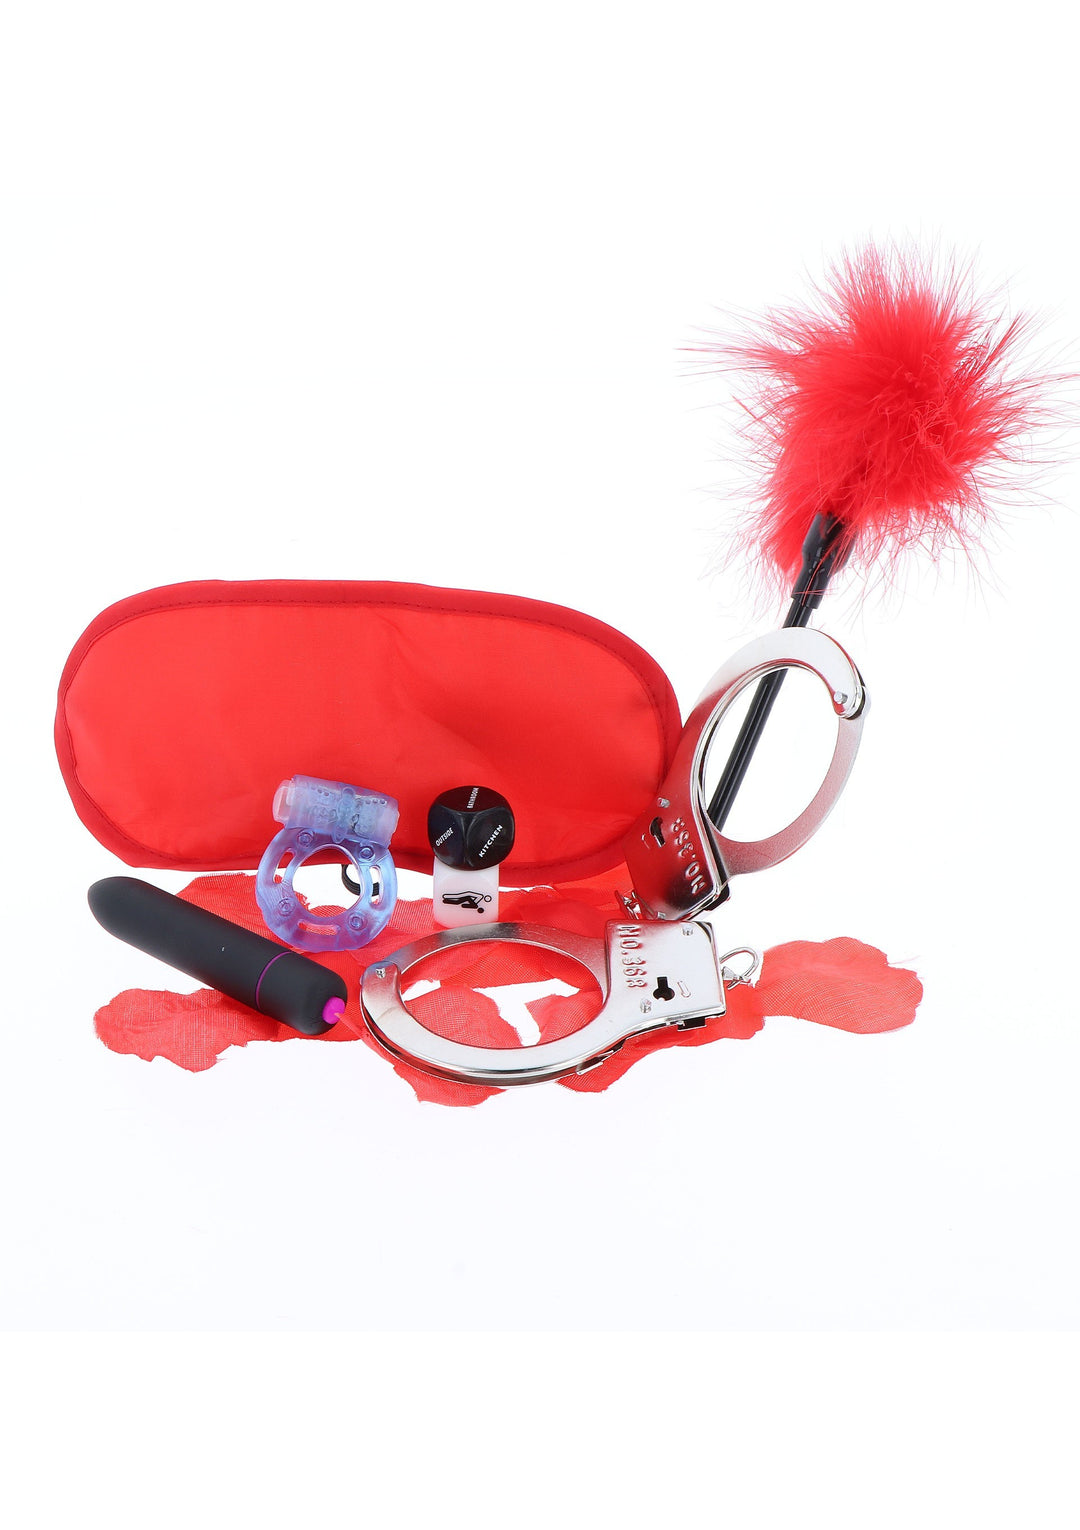 handcuffs whip ring mask vibrator game set red